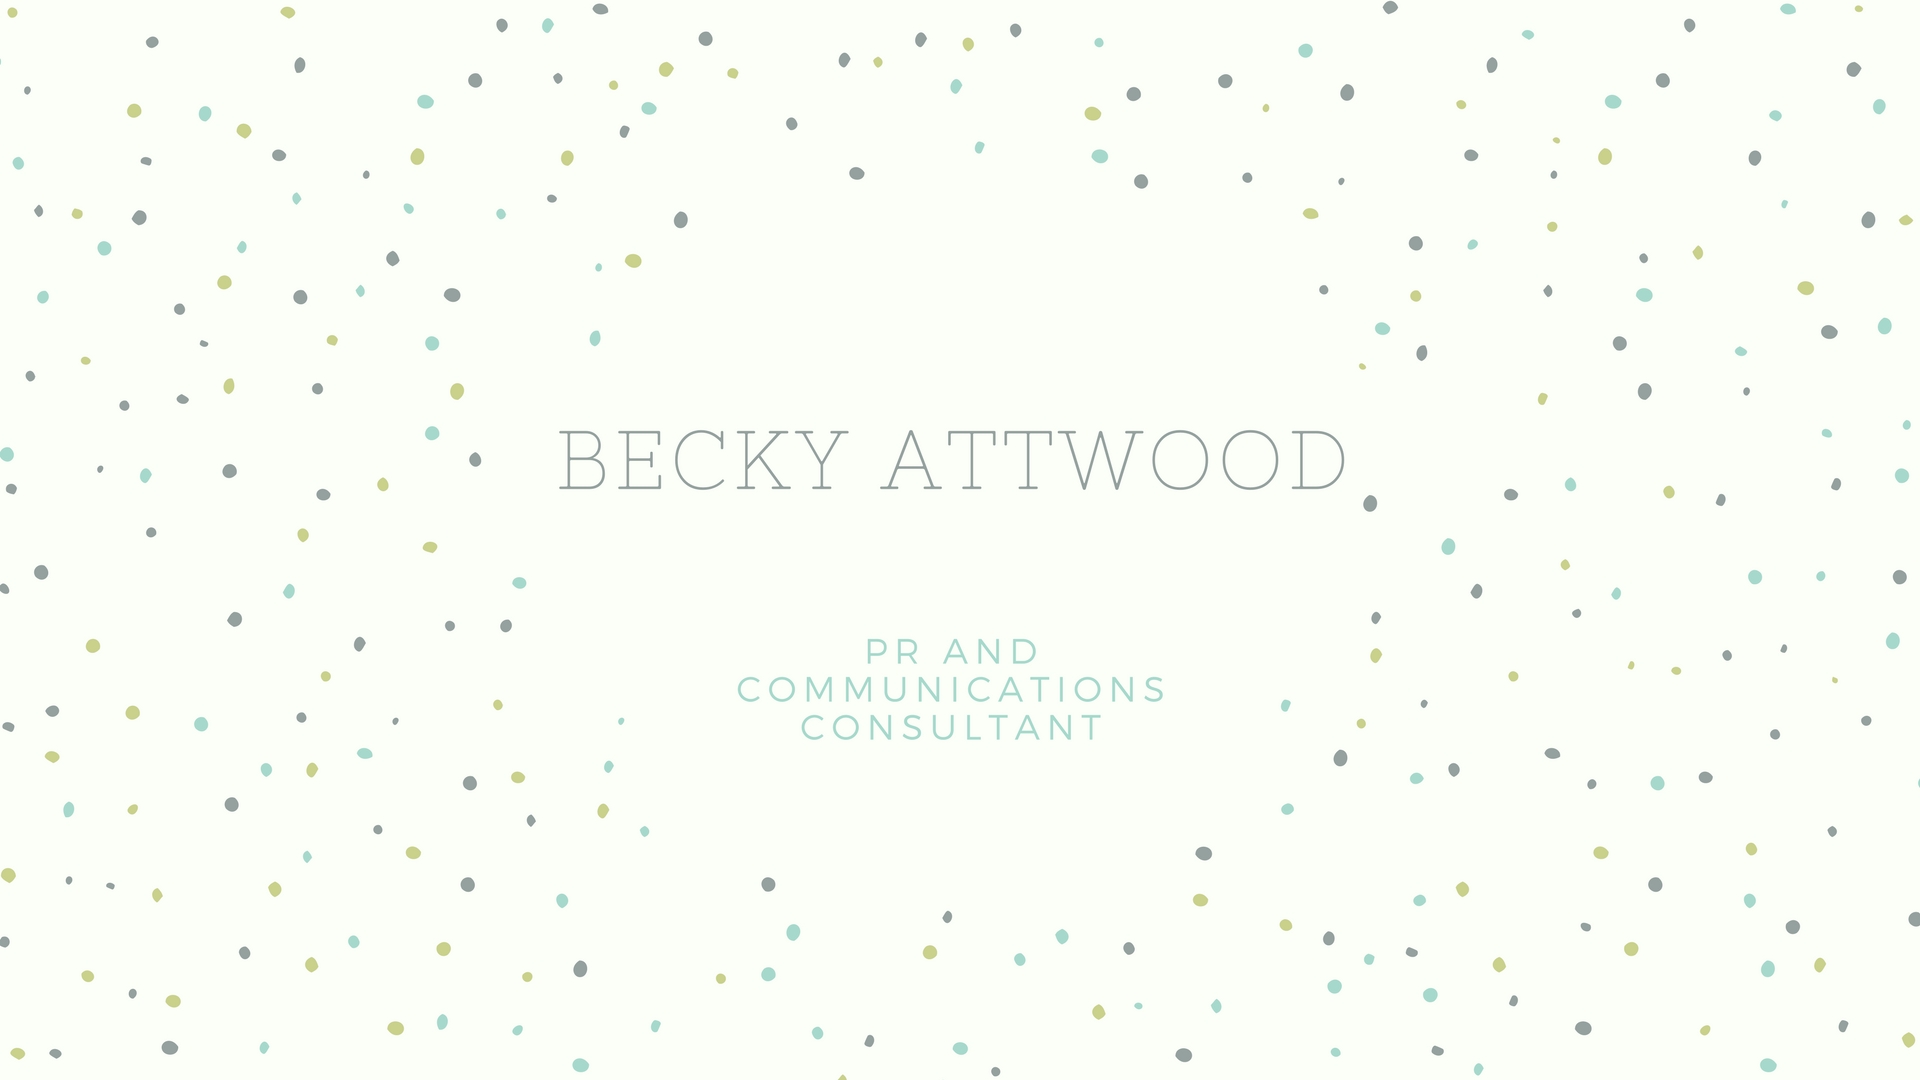 Becky Attwood is a PR and communications consultant based in Hampshire, who can create exciting and engaging marketing material to make your brand stand out from the crowd.